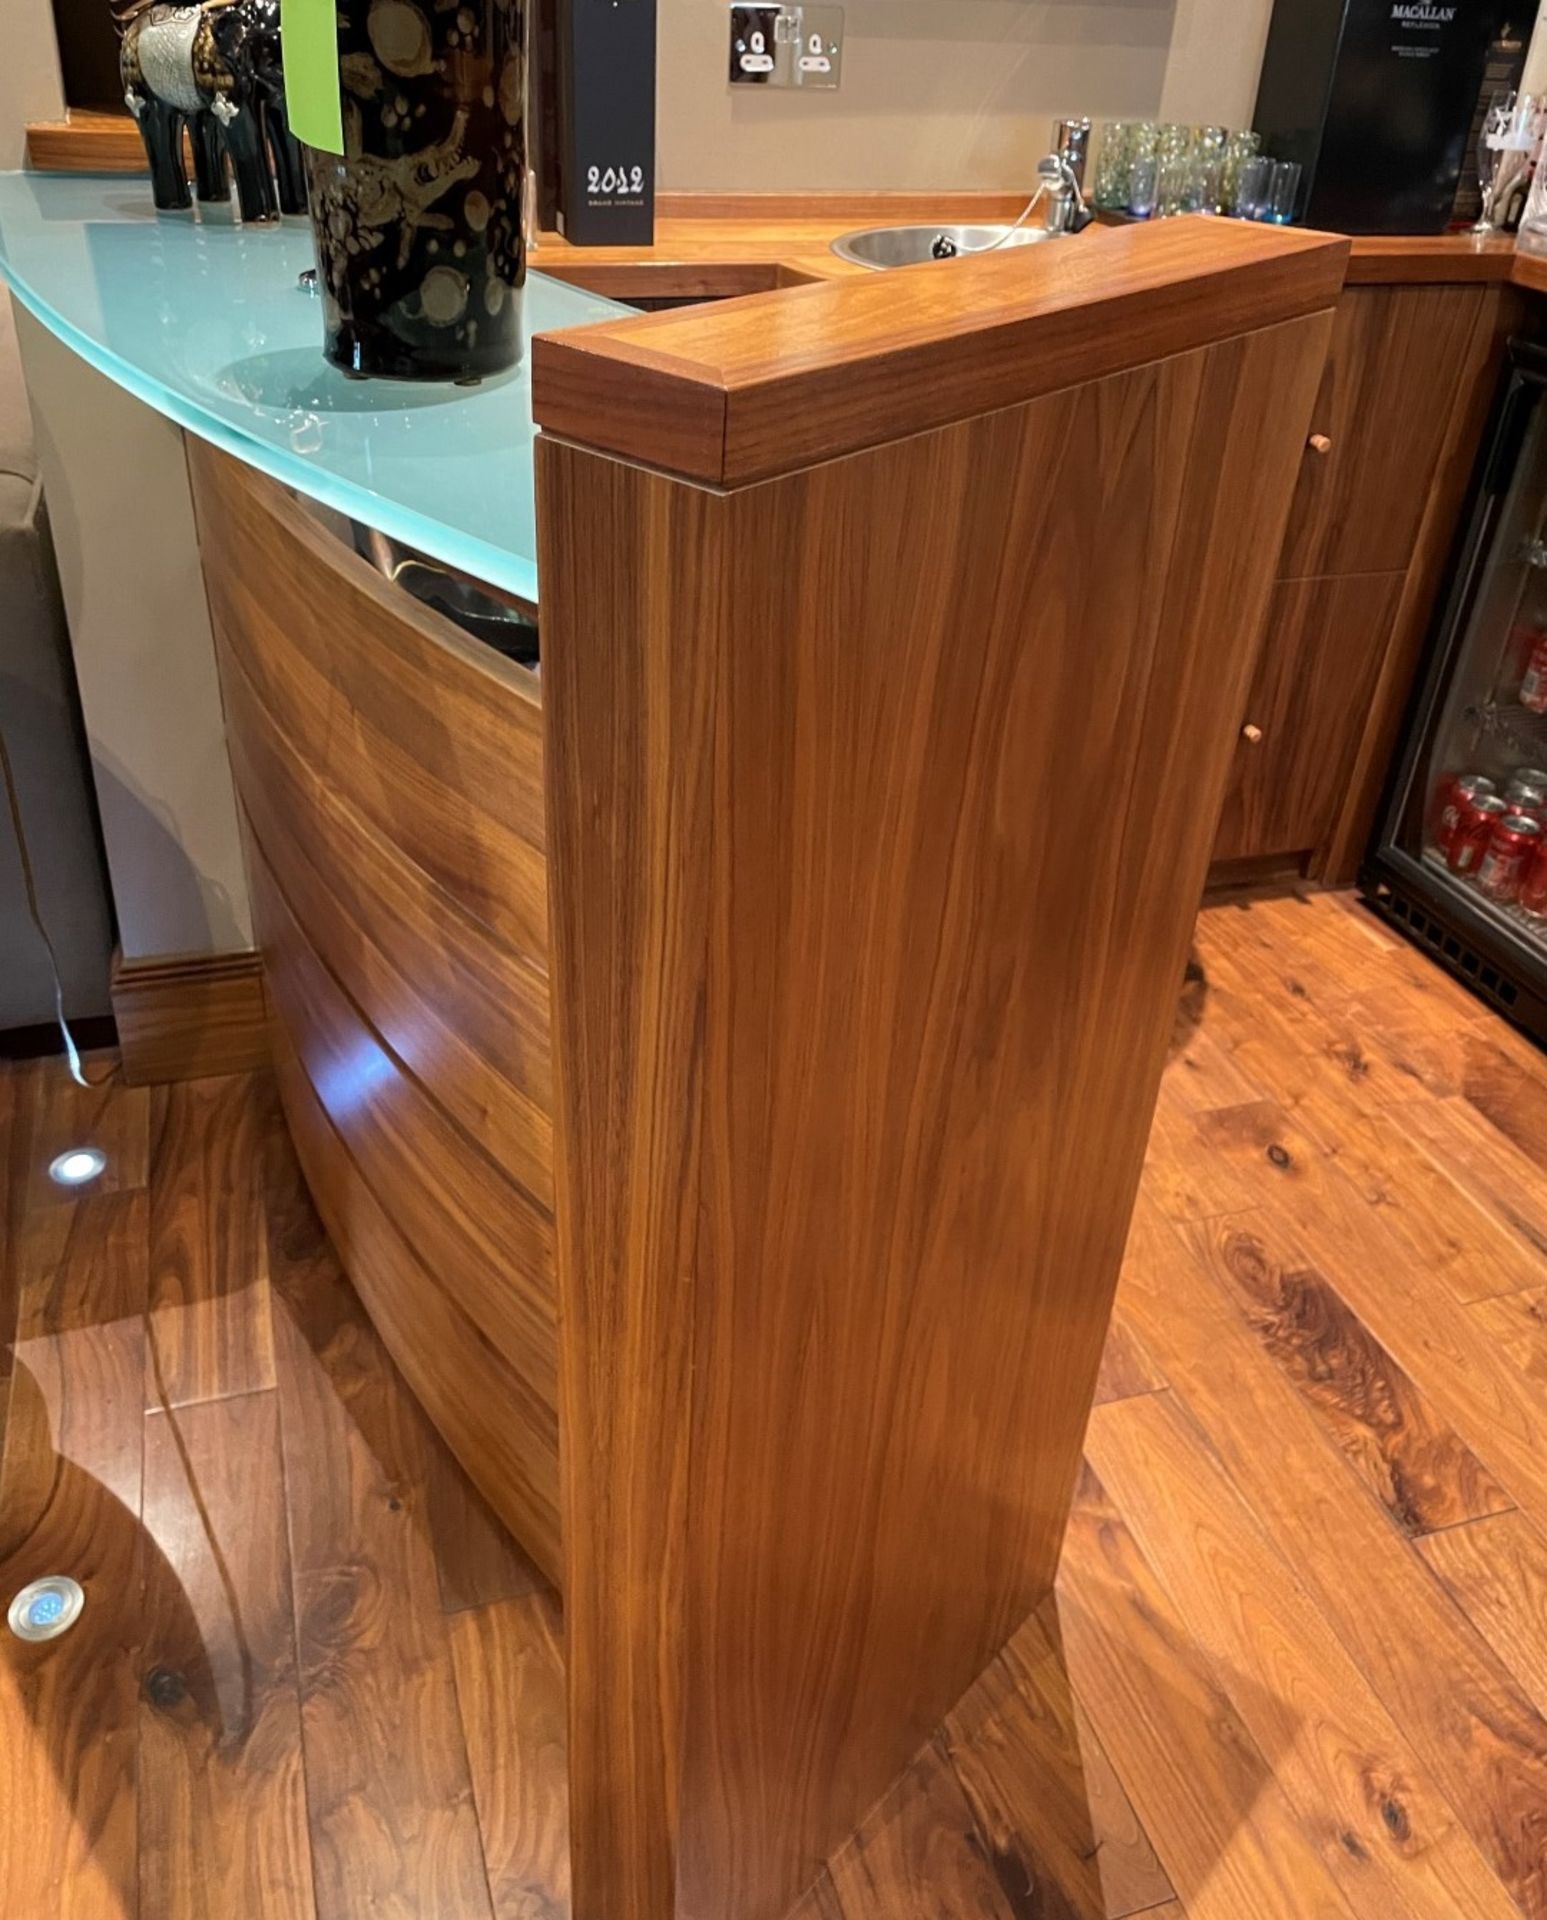 1 x Bespoke Fitted Curved Bar Area In Cherry Wood With A Frosted Glass Counter - NO VAT - Image 6 of 30